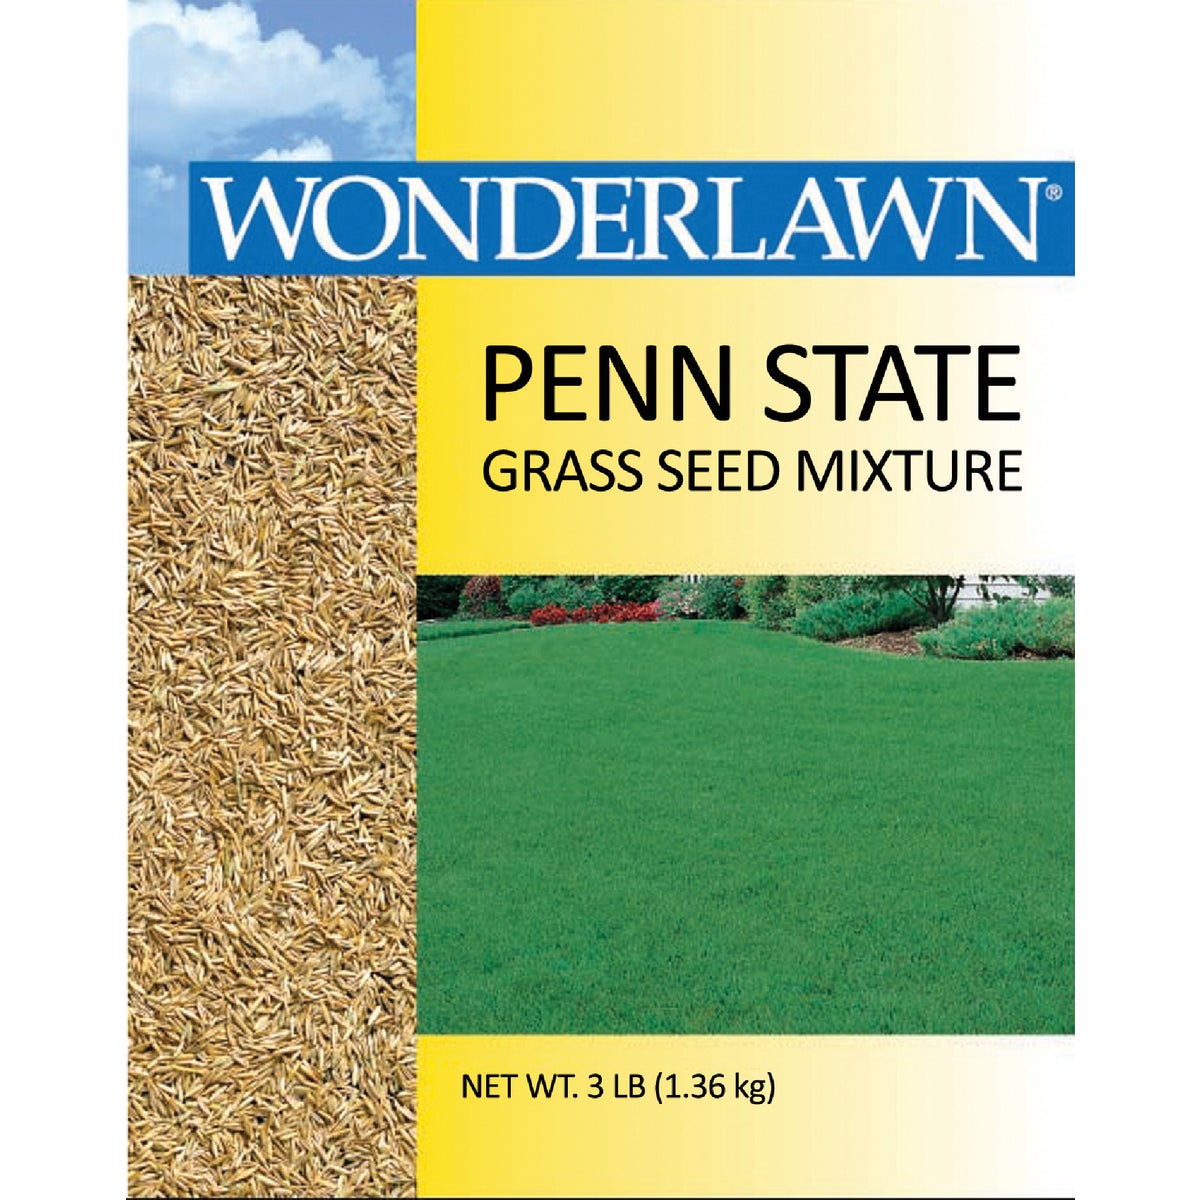 Item 700393, Premium all-purpose grass seed mix for use in sunny to moderately shady 